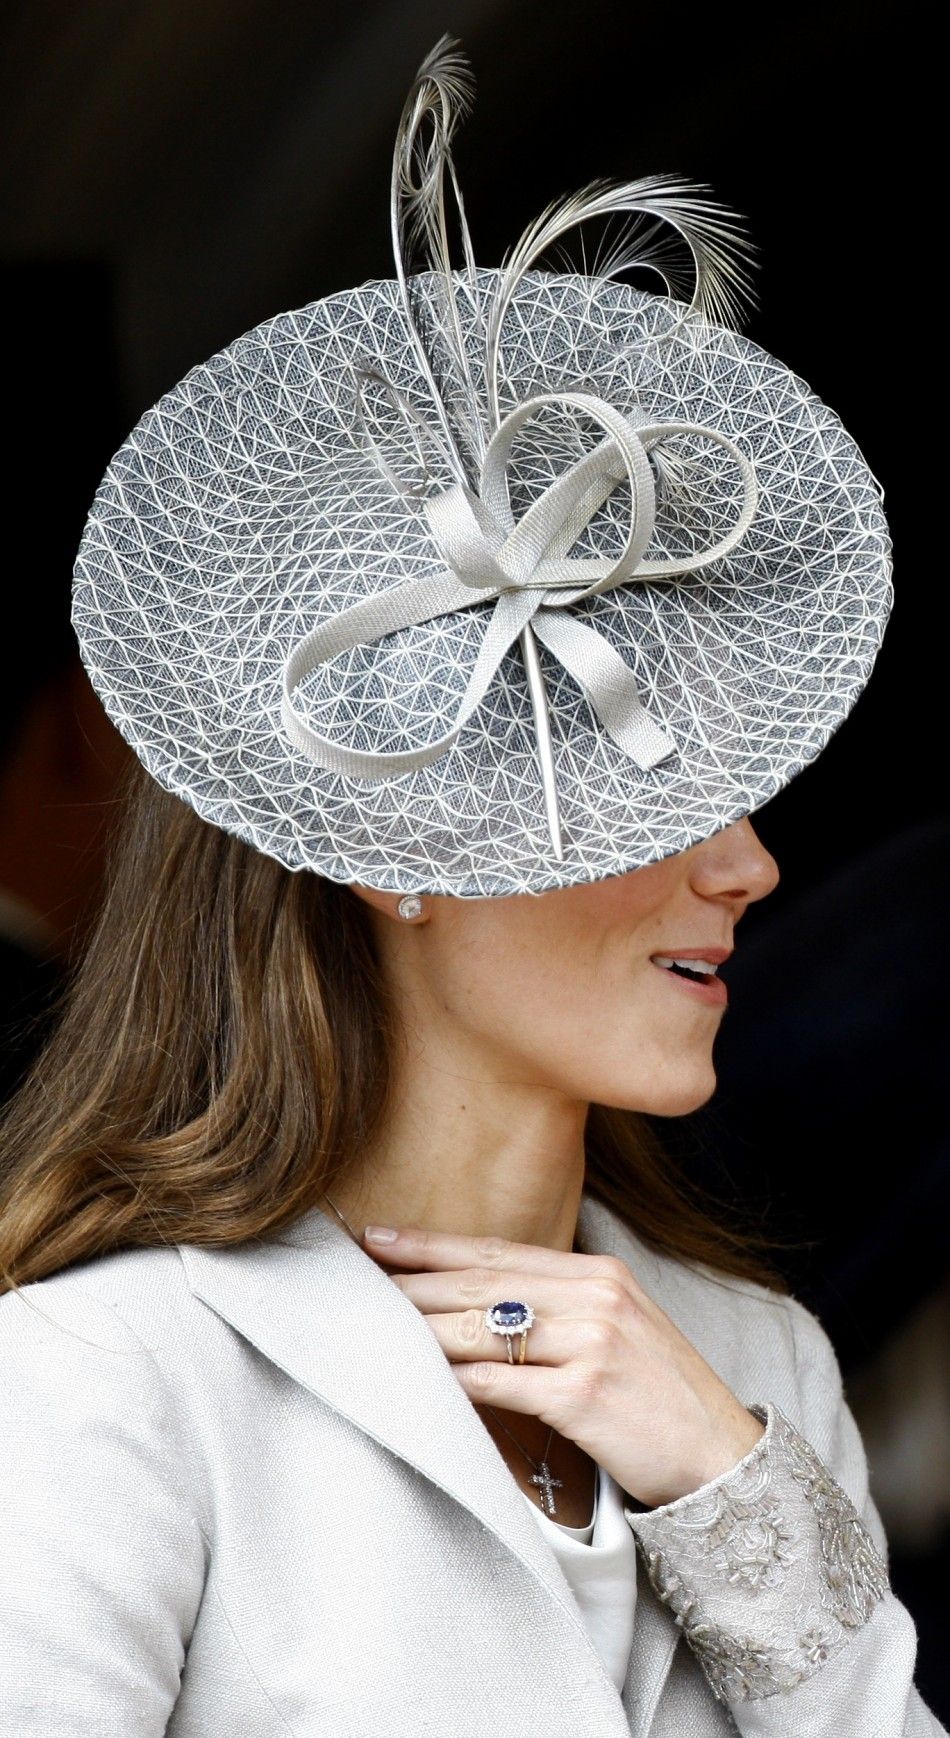 Kate Middleton in signature style at Order of the Garter service.